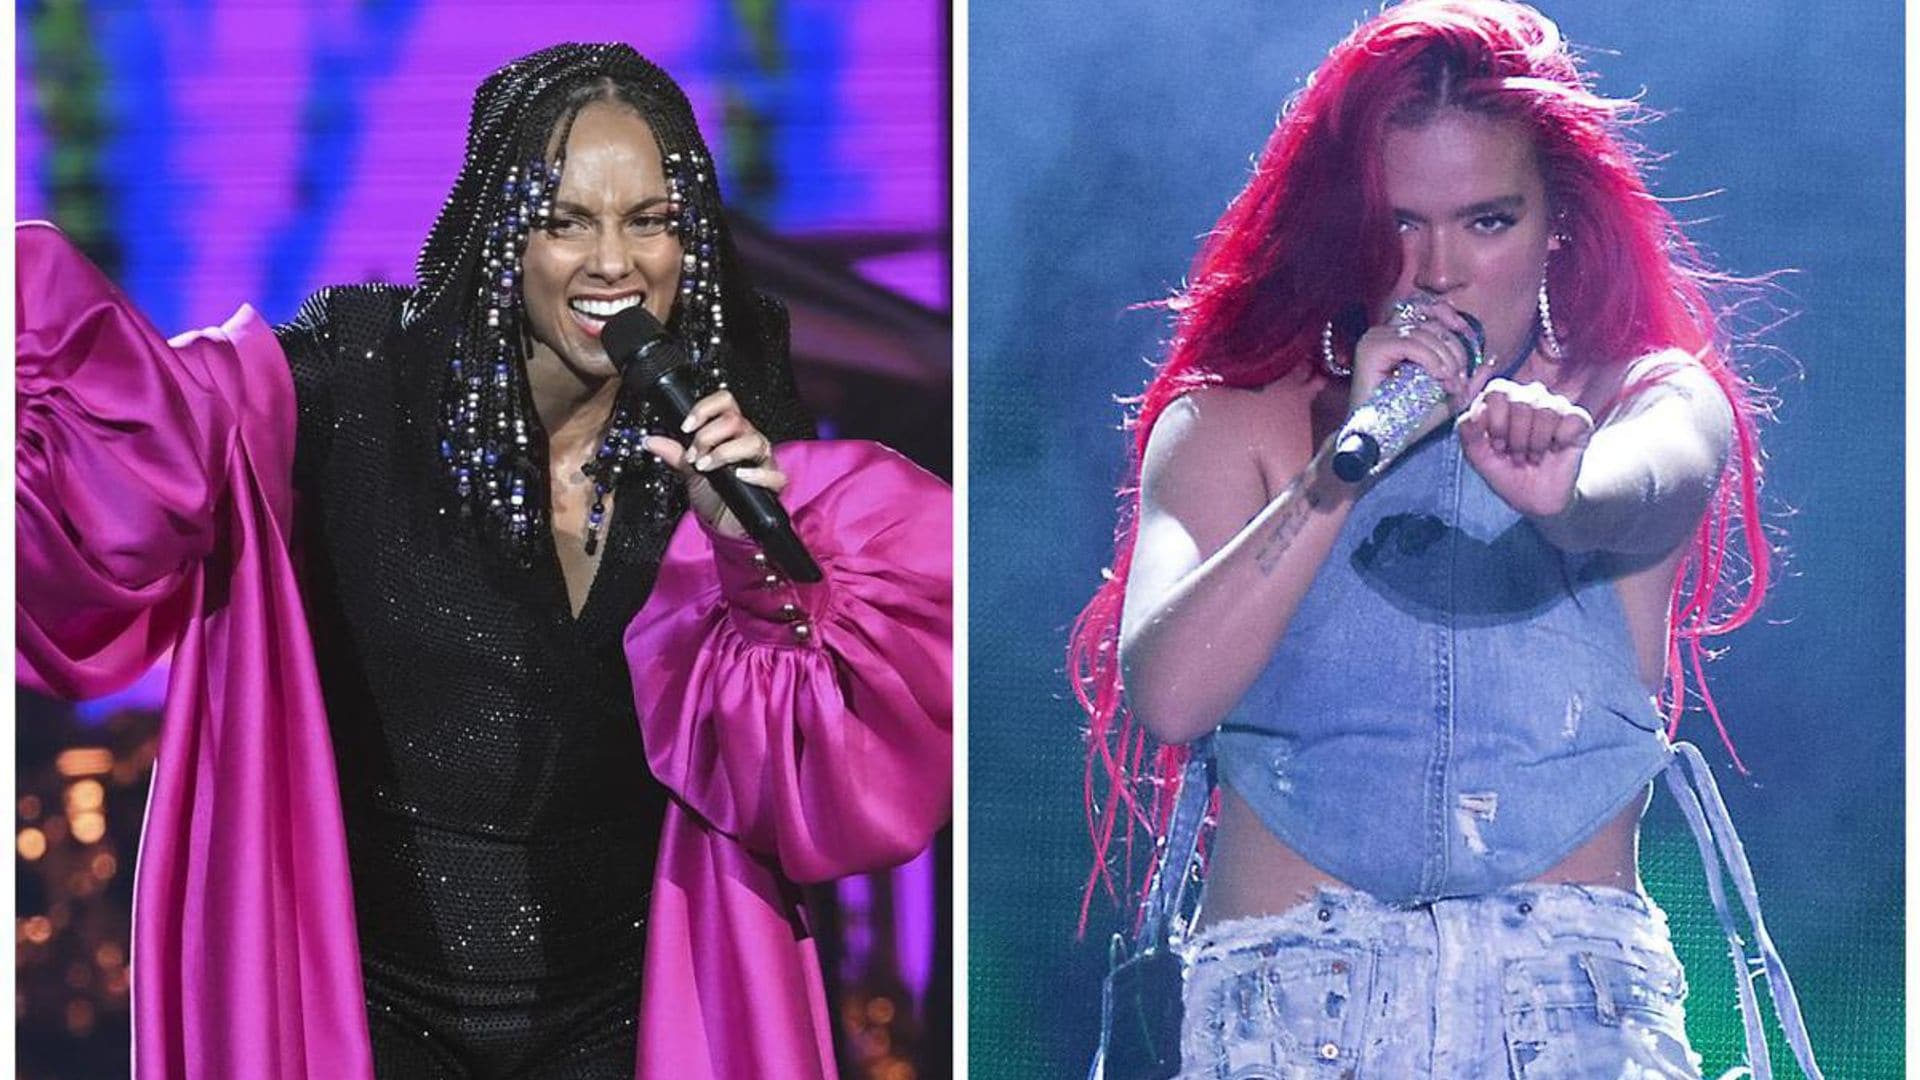 Alicia Keys surprised fans with Karol G and Goyo during her first concert in Colombia